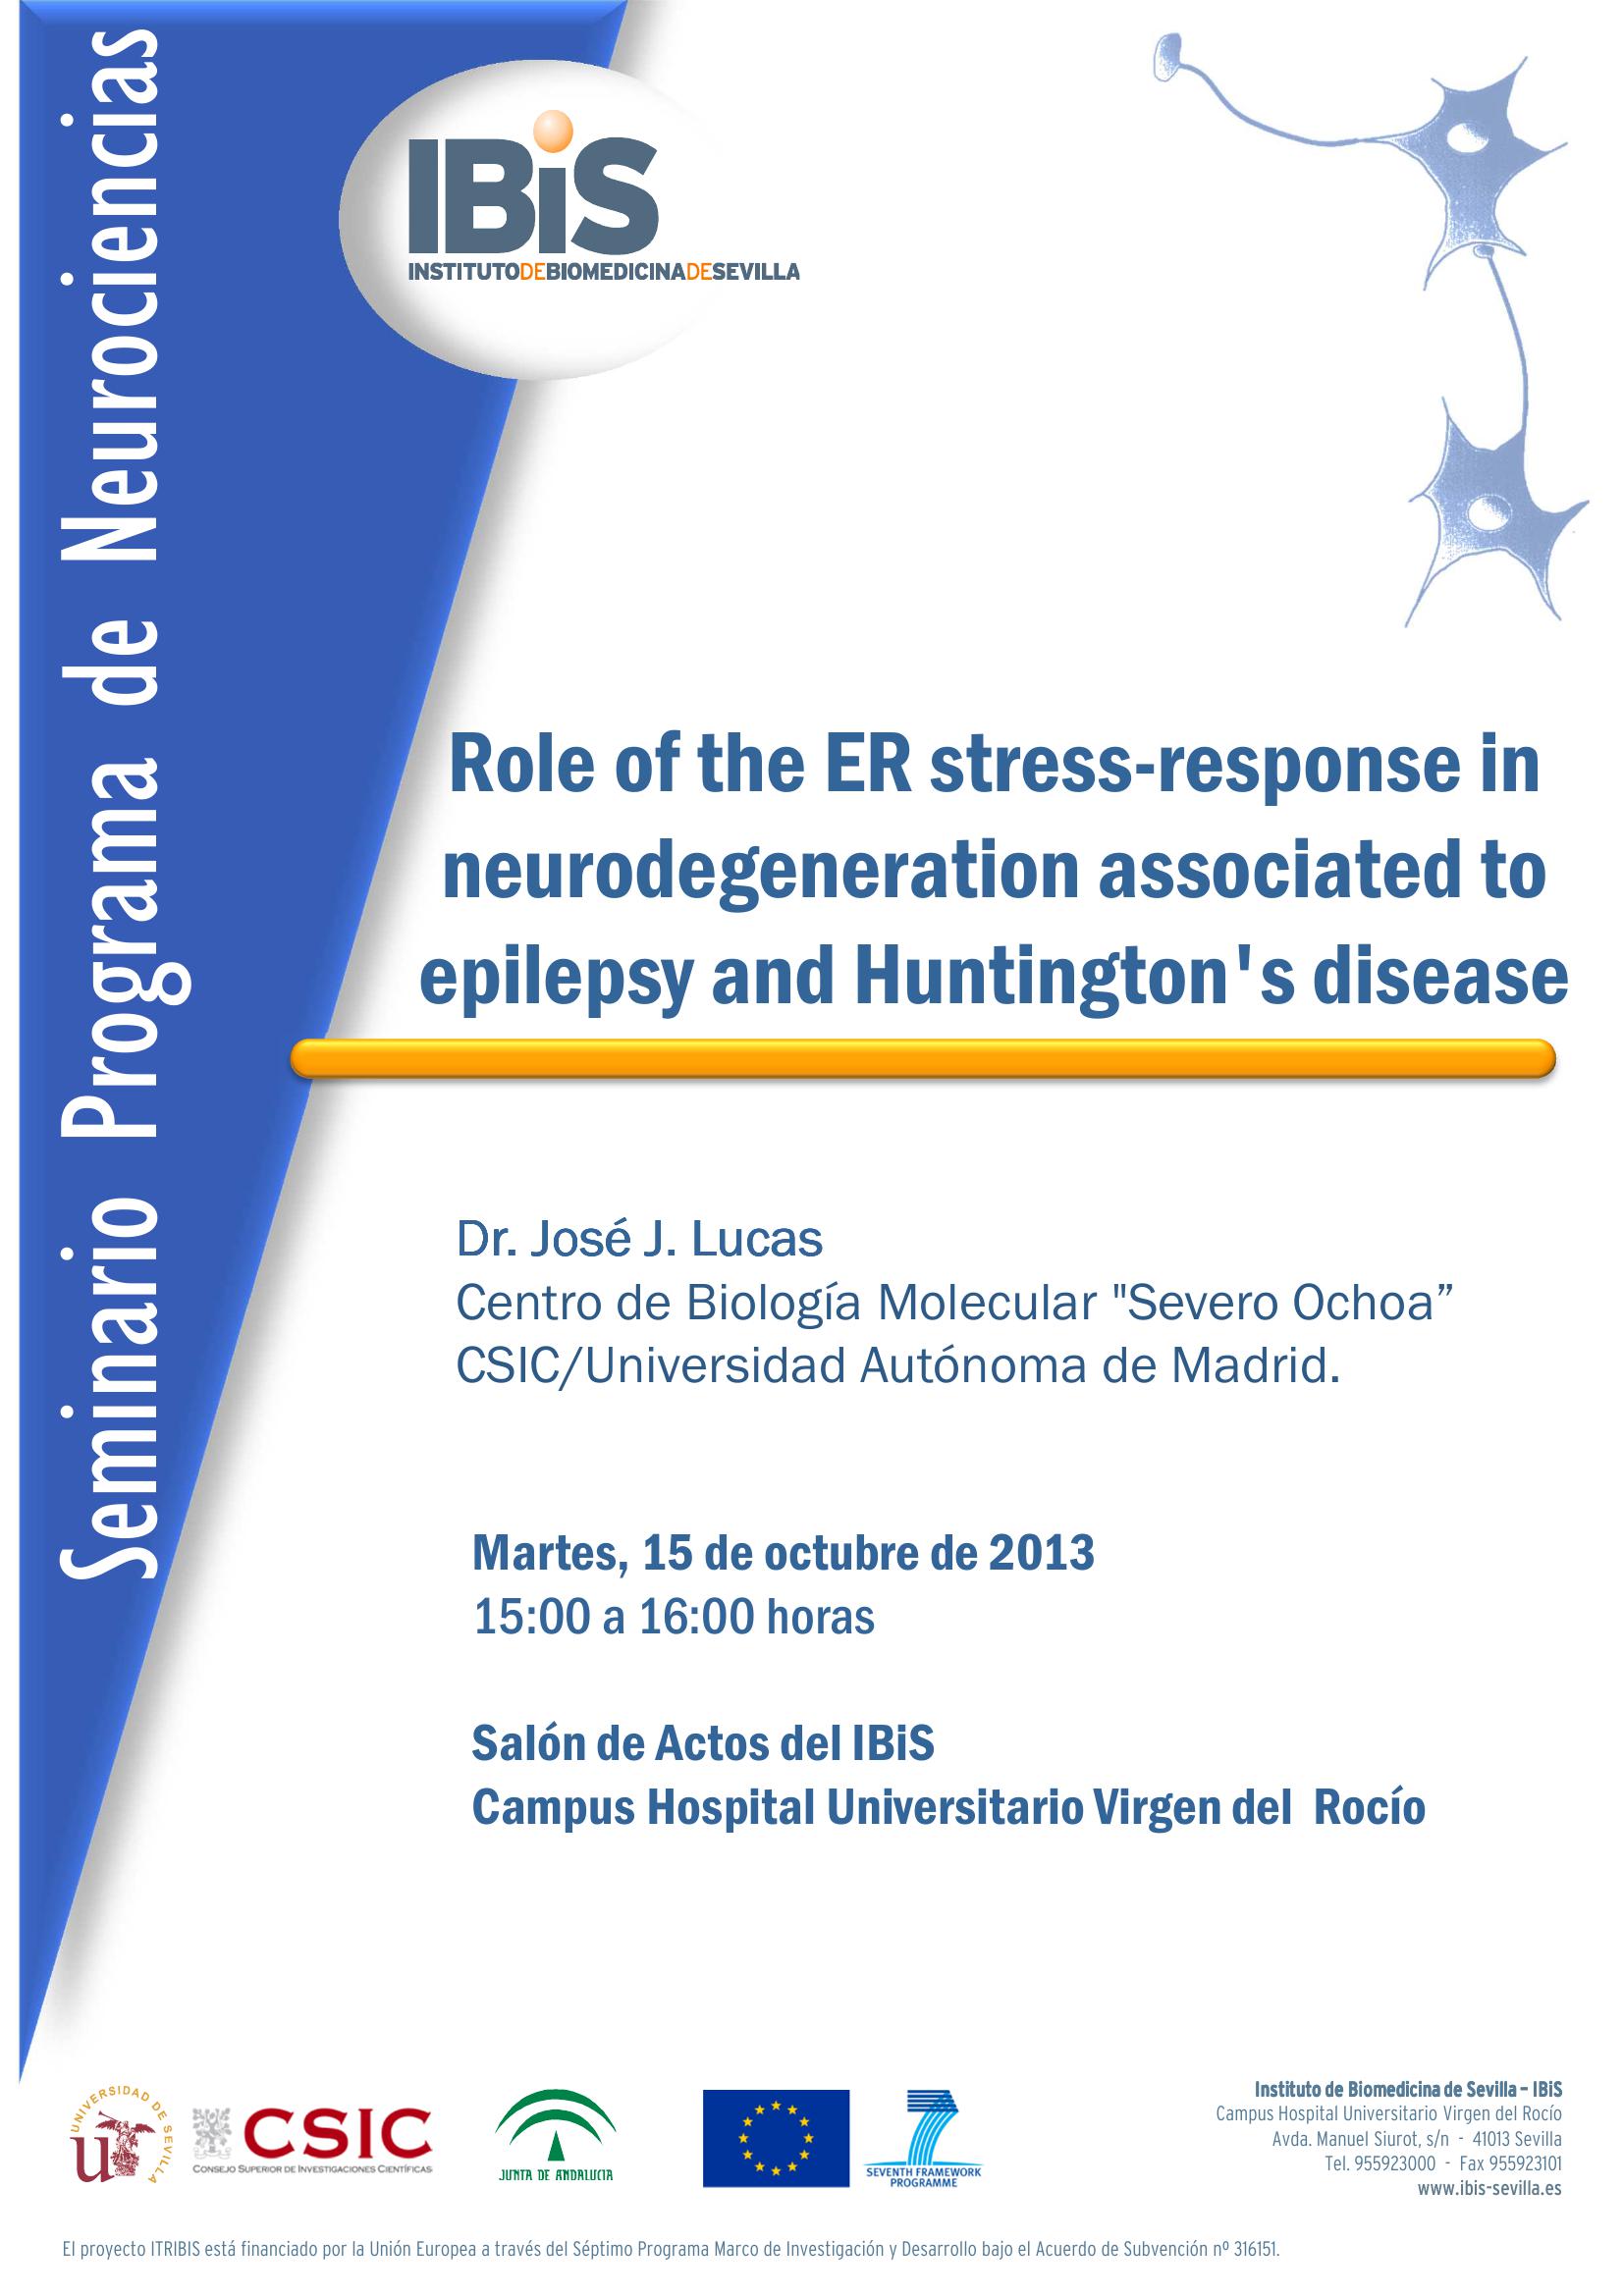 Poster: Role of the ER stress-response in neurodegeneration associated to epilepsy and Huntington's disease